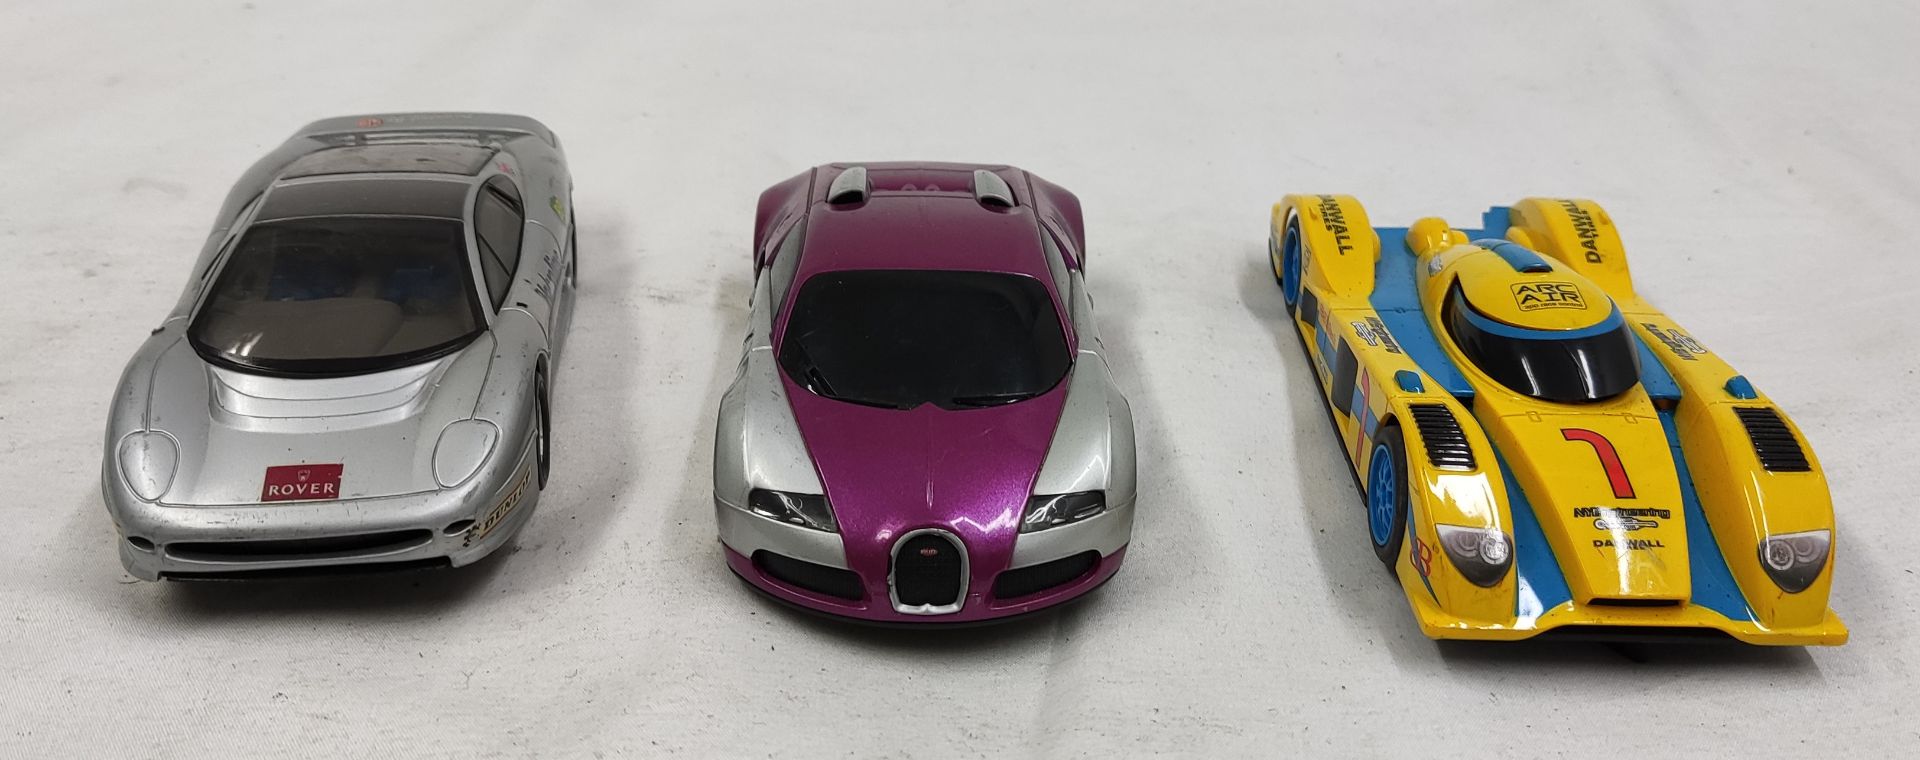 3 x Scalextric Cars - Includes Jaguar XJ220, Bugatti and LM Cars - Tested and Working - Used - CL444 - Image 2 of 14